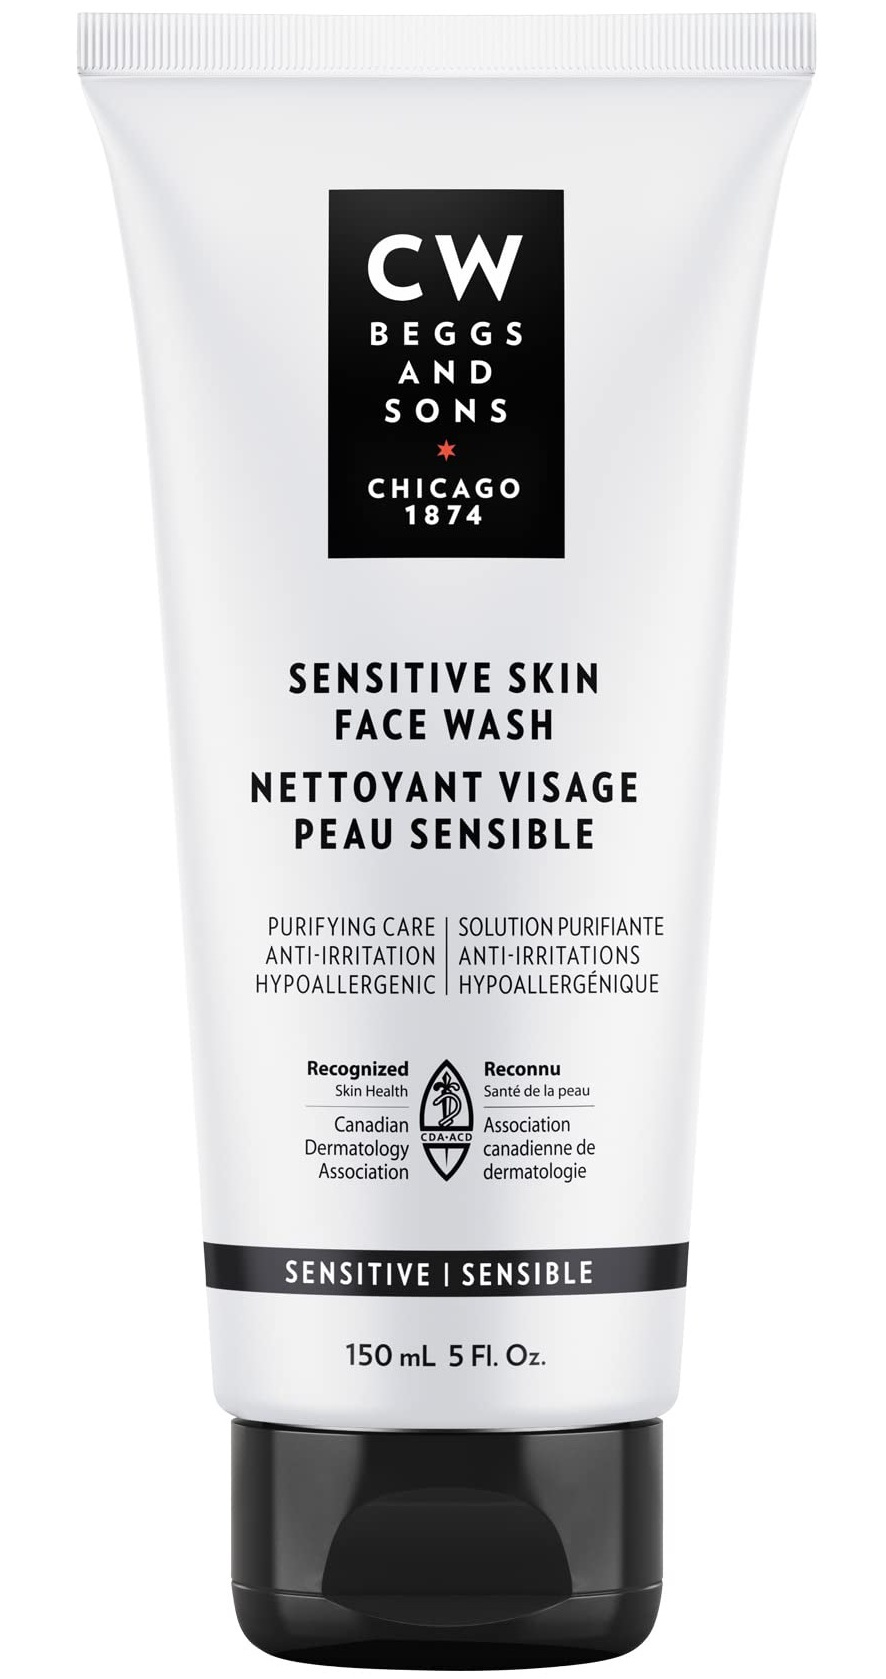 CW Beggs and Sons Sensitive Skin Face Wash